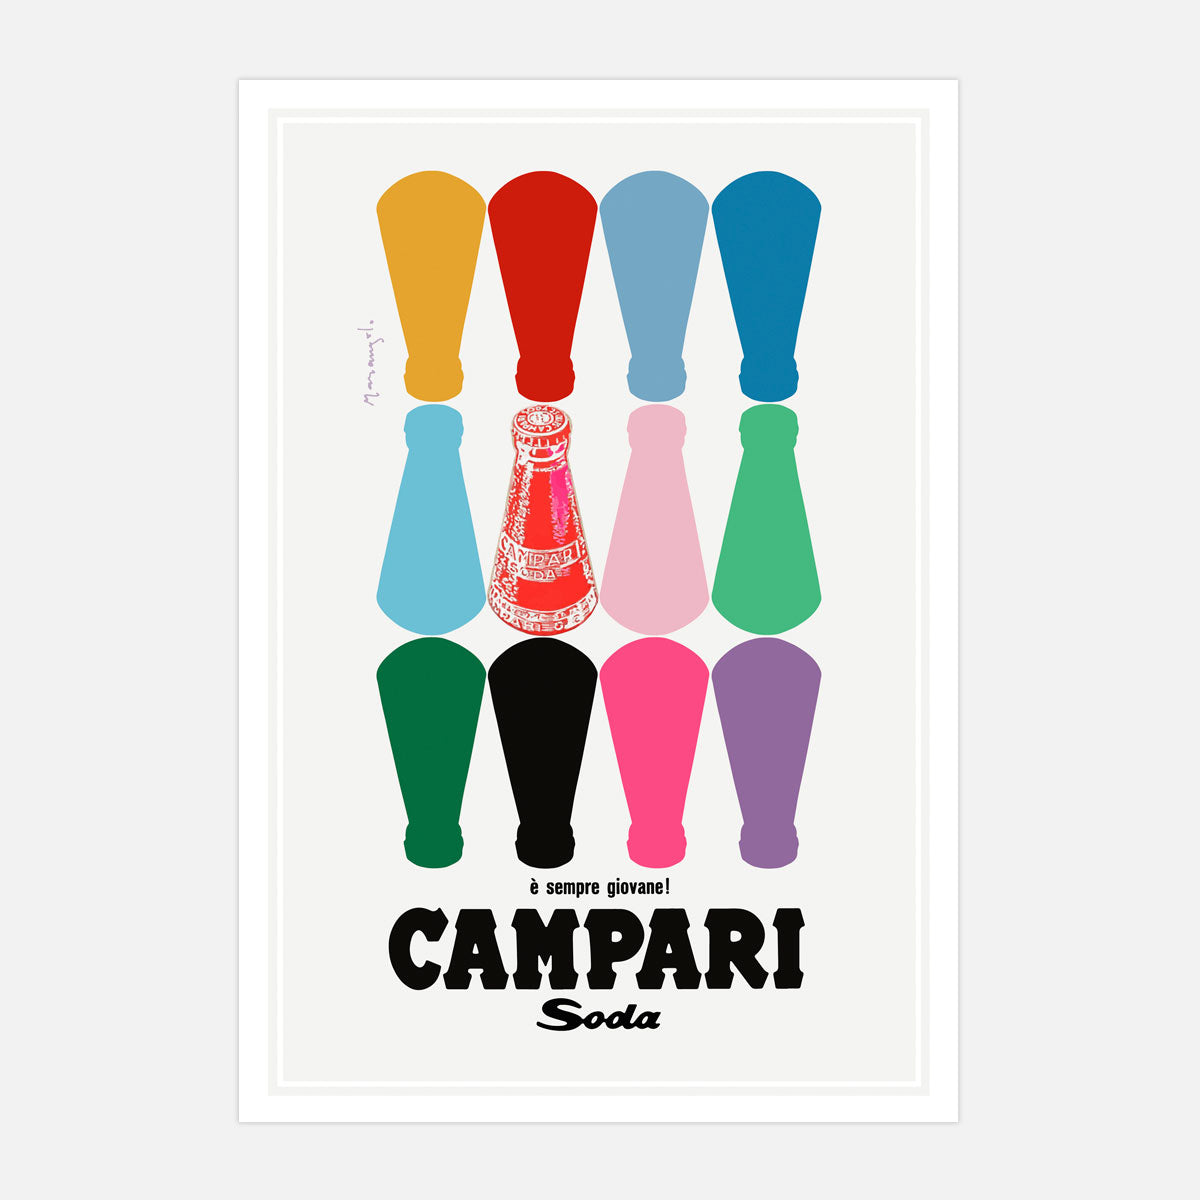 Campari Soda #2 vintage retro advertising poster print from Places We Luv